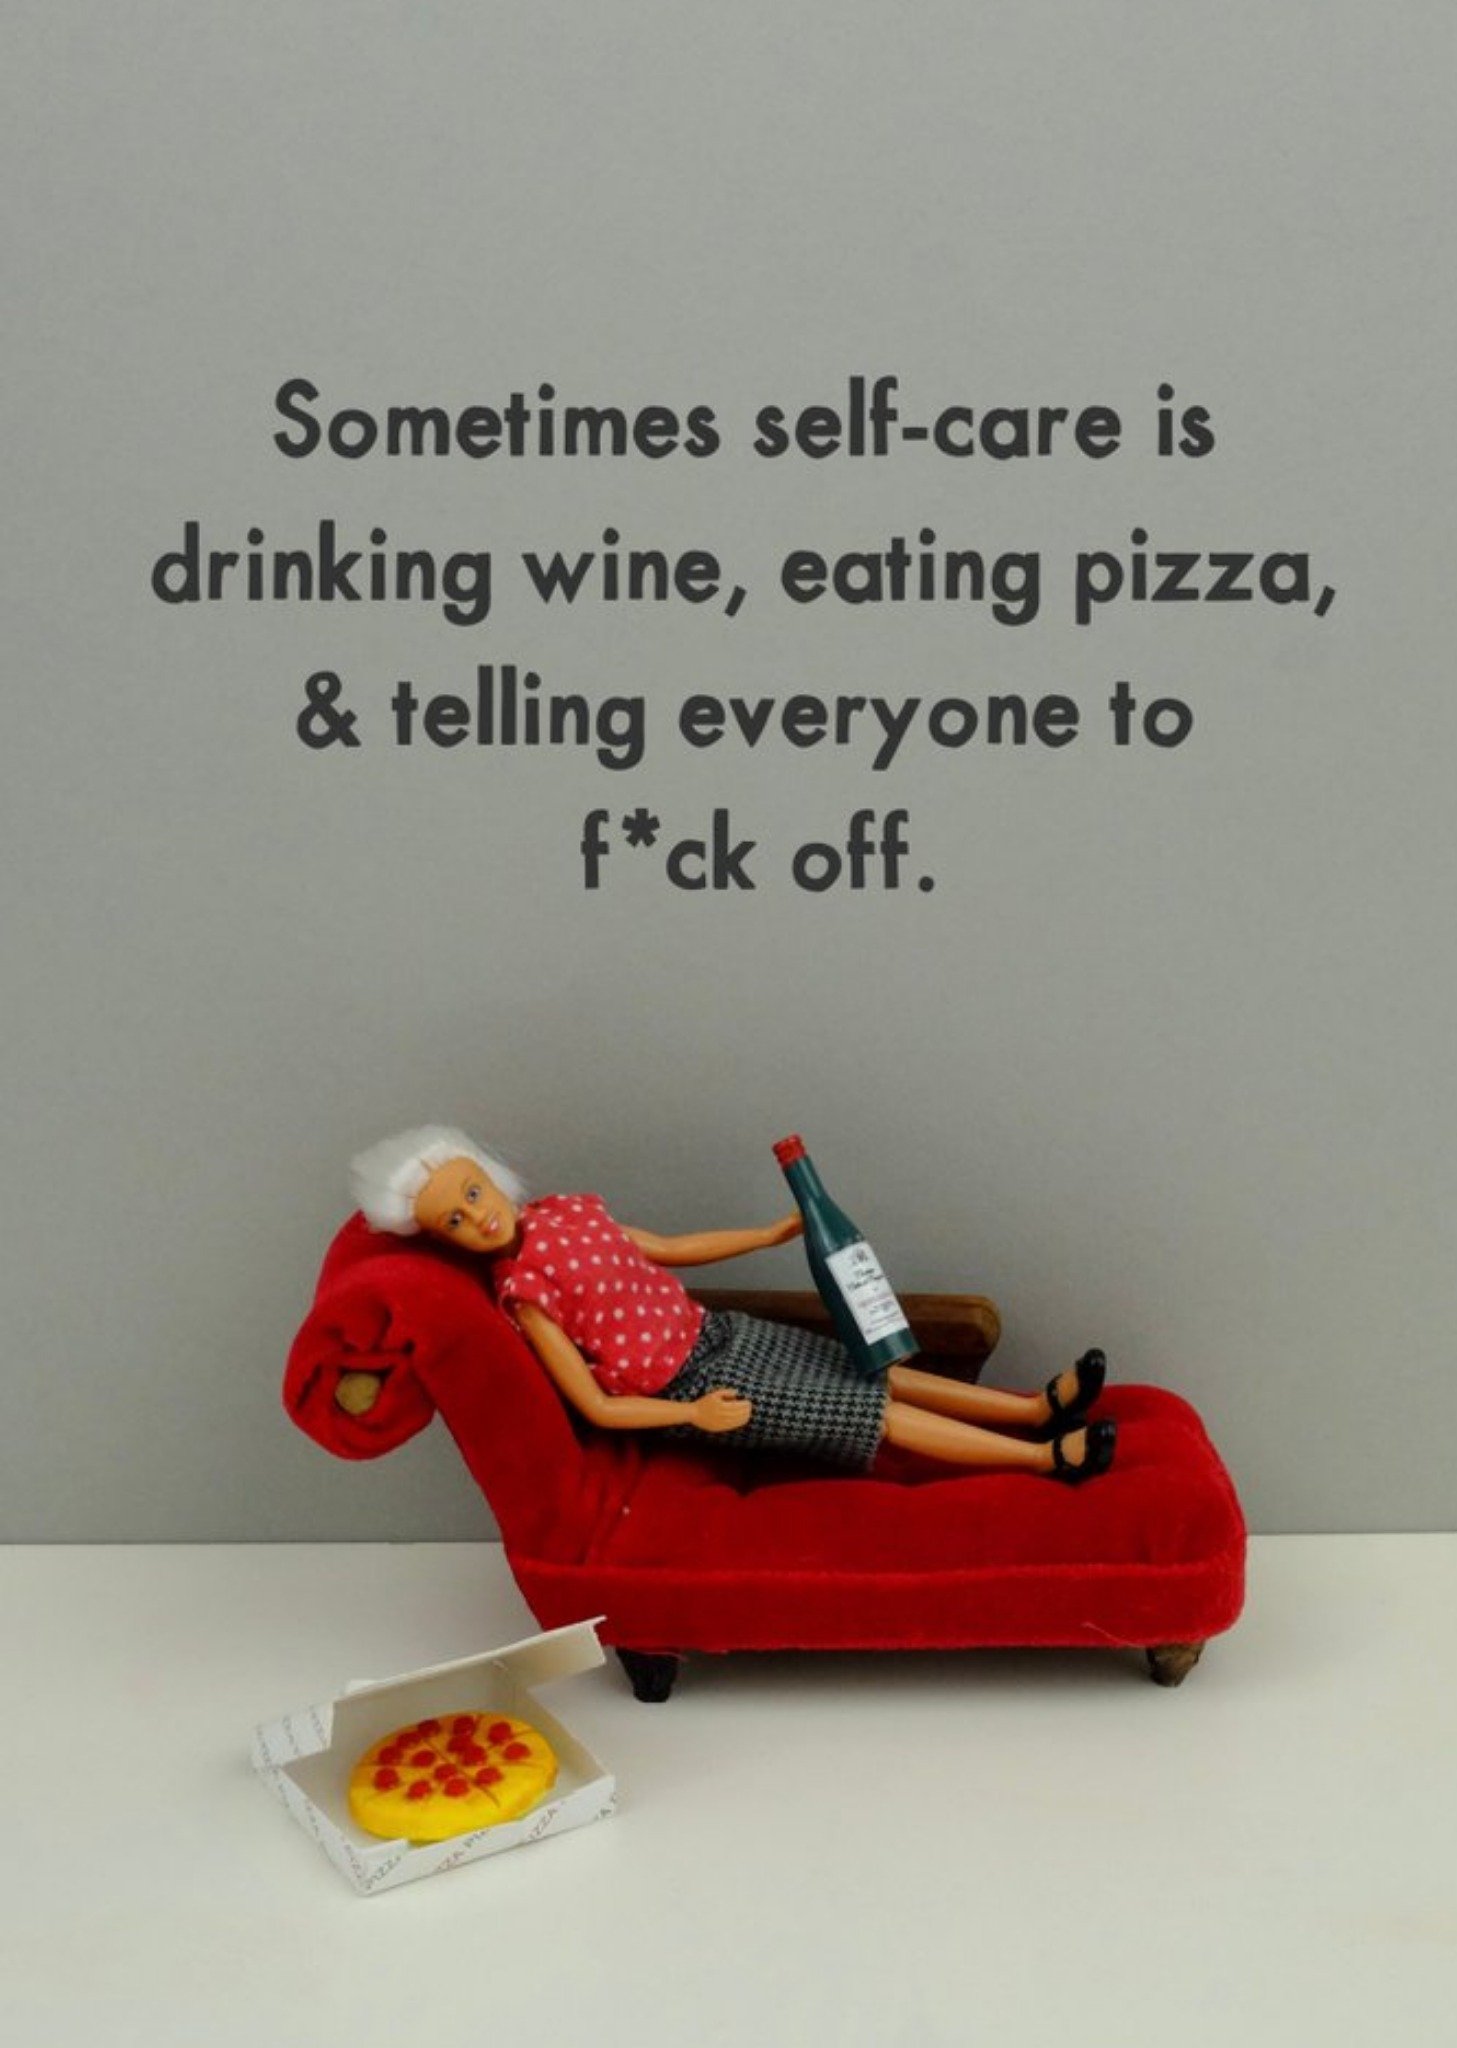 Bold And Bright Funny Photographic Image Of A Doll Drinking Wine And Eating Pizza Self-Care Card Eca